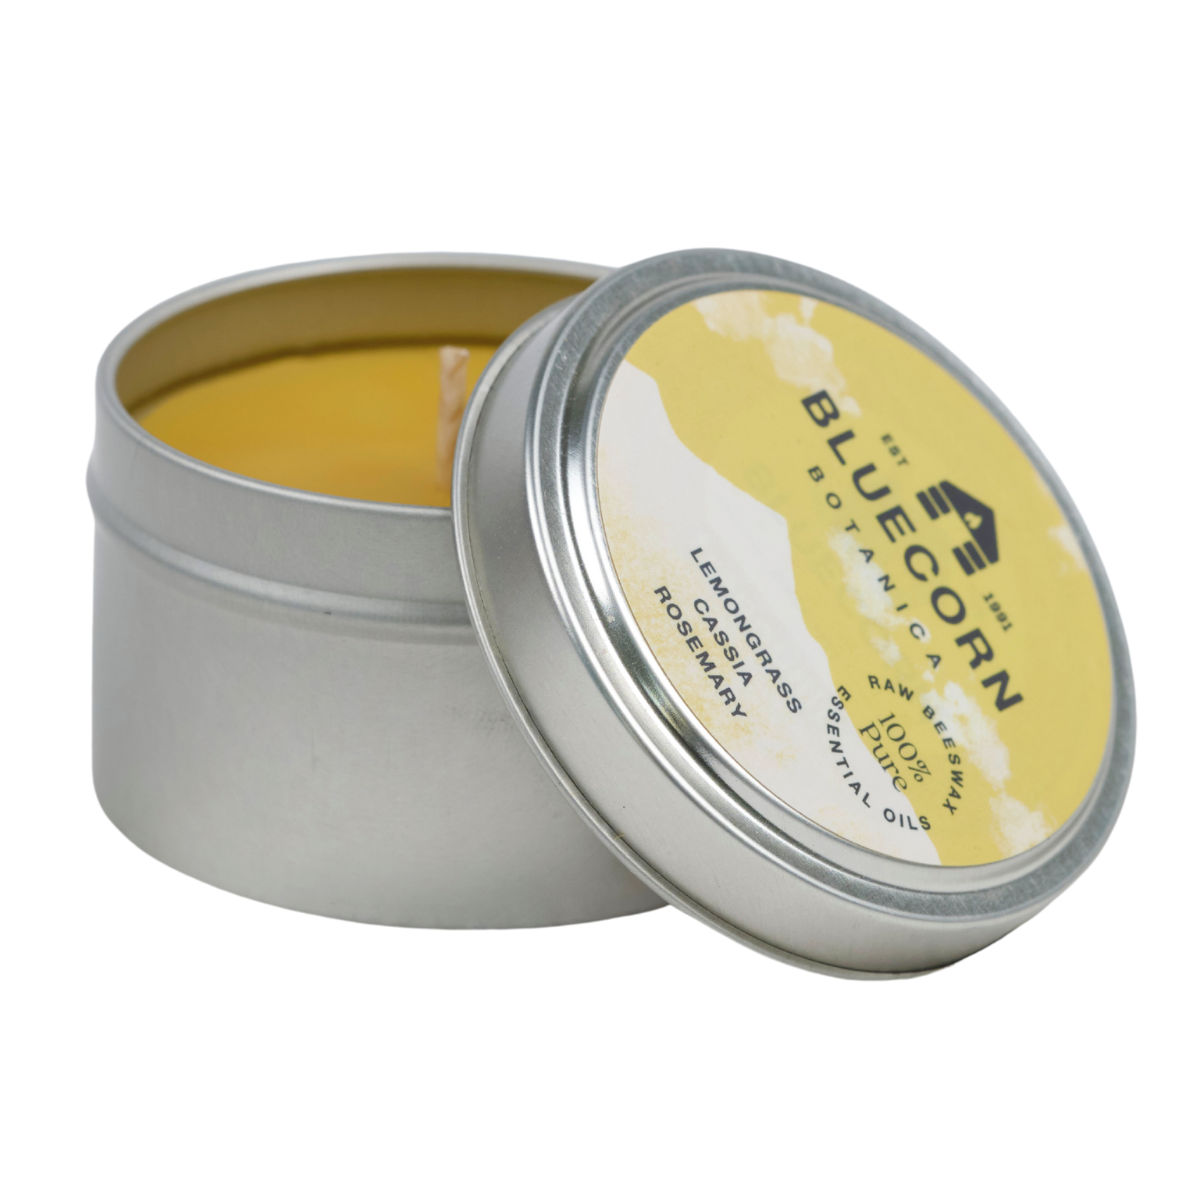 Botanica Beeswax Scented Candles | Travel Tin